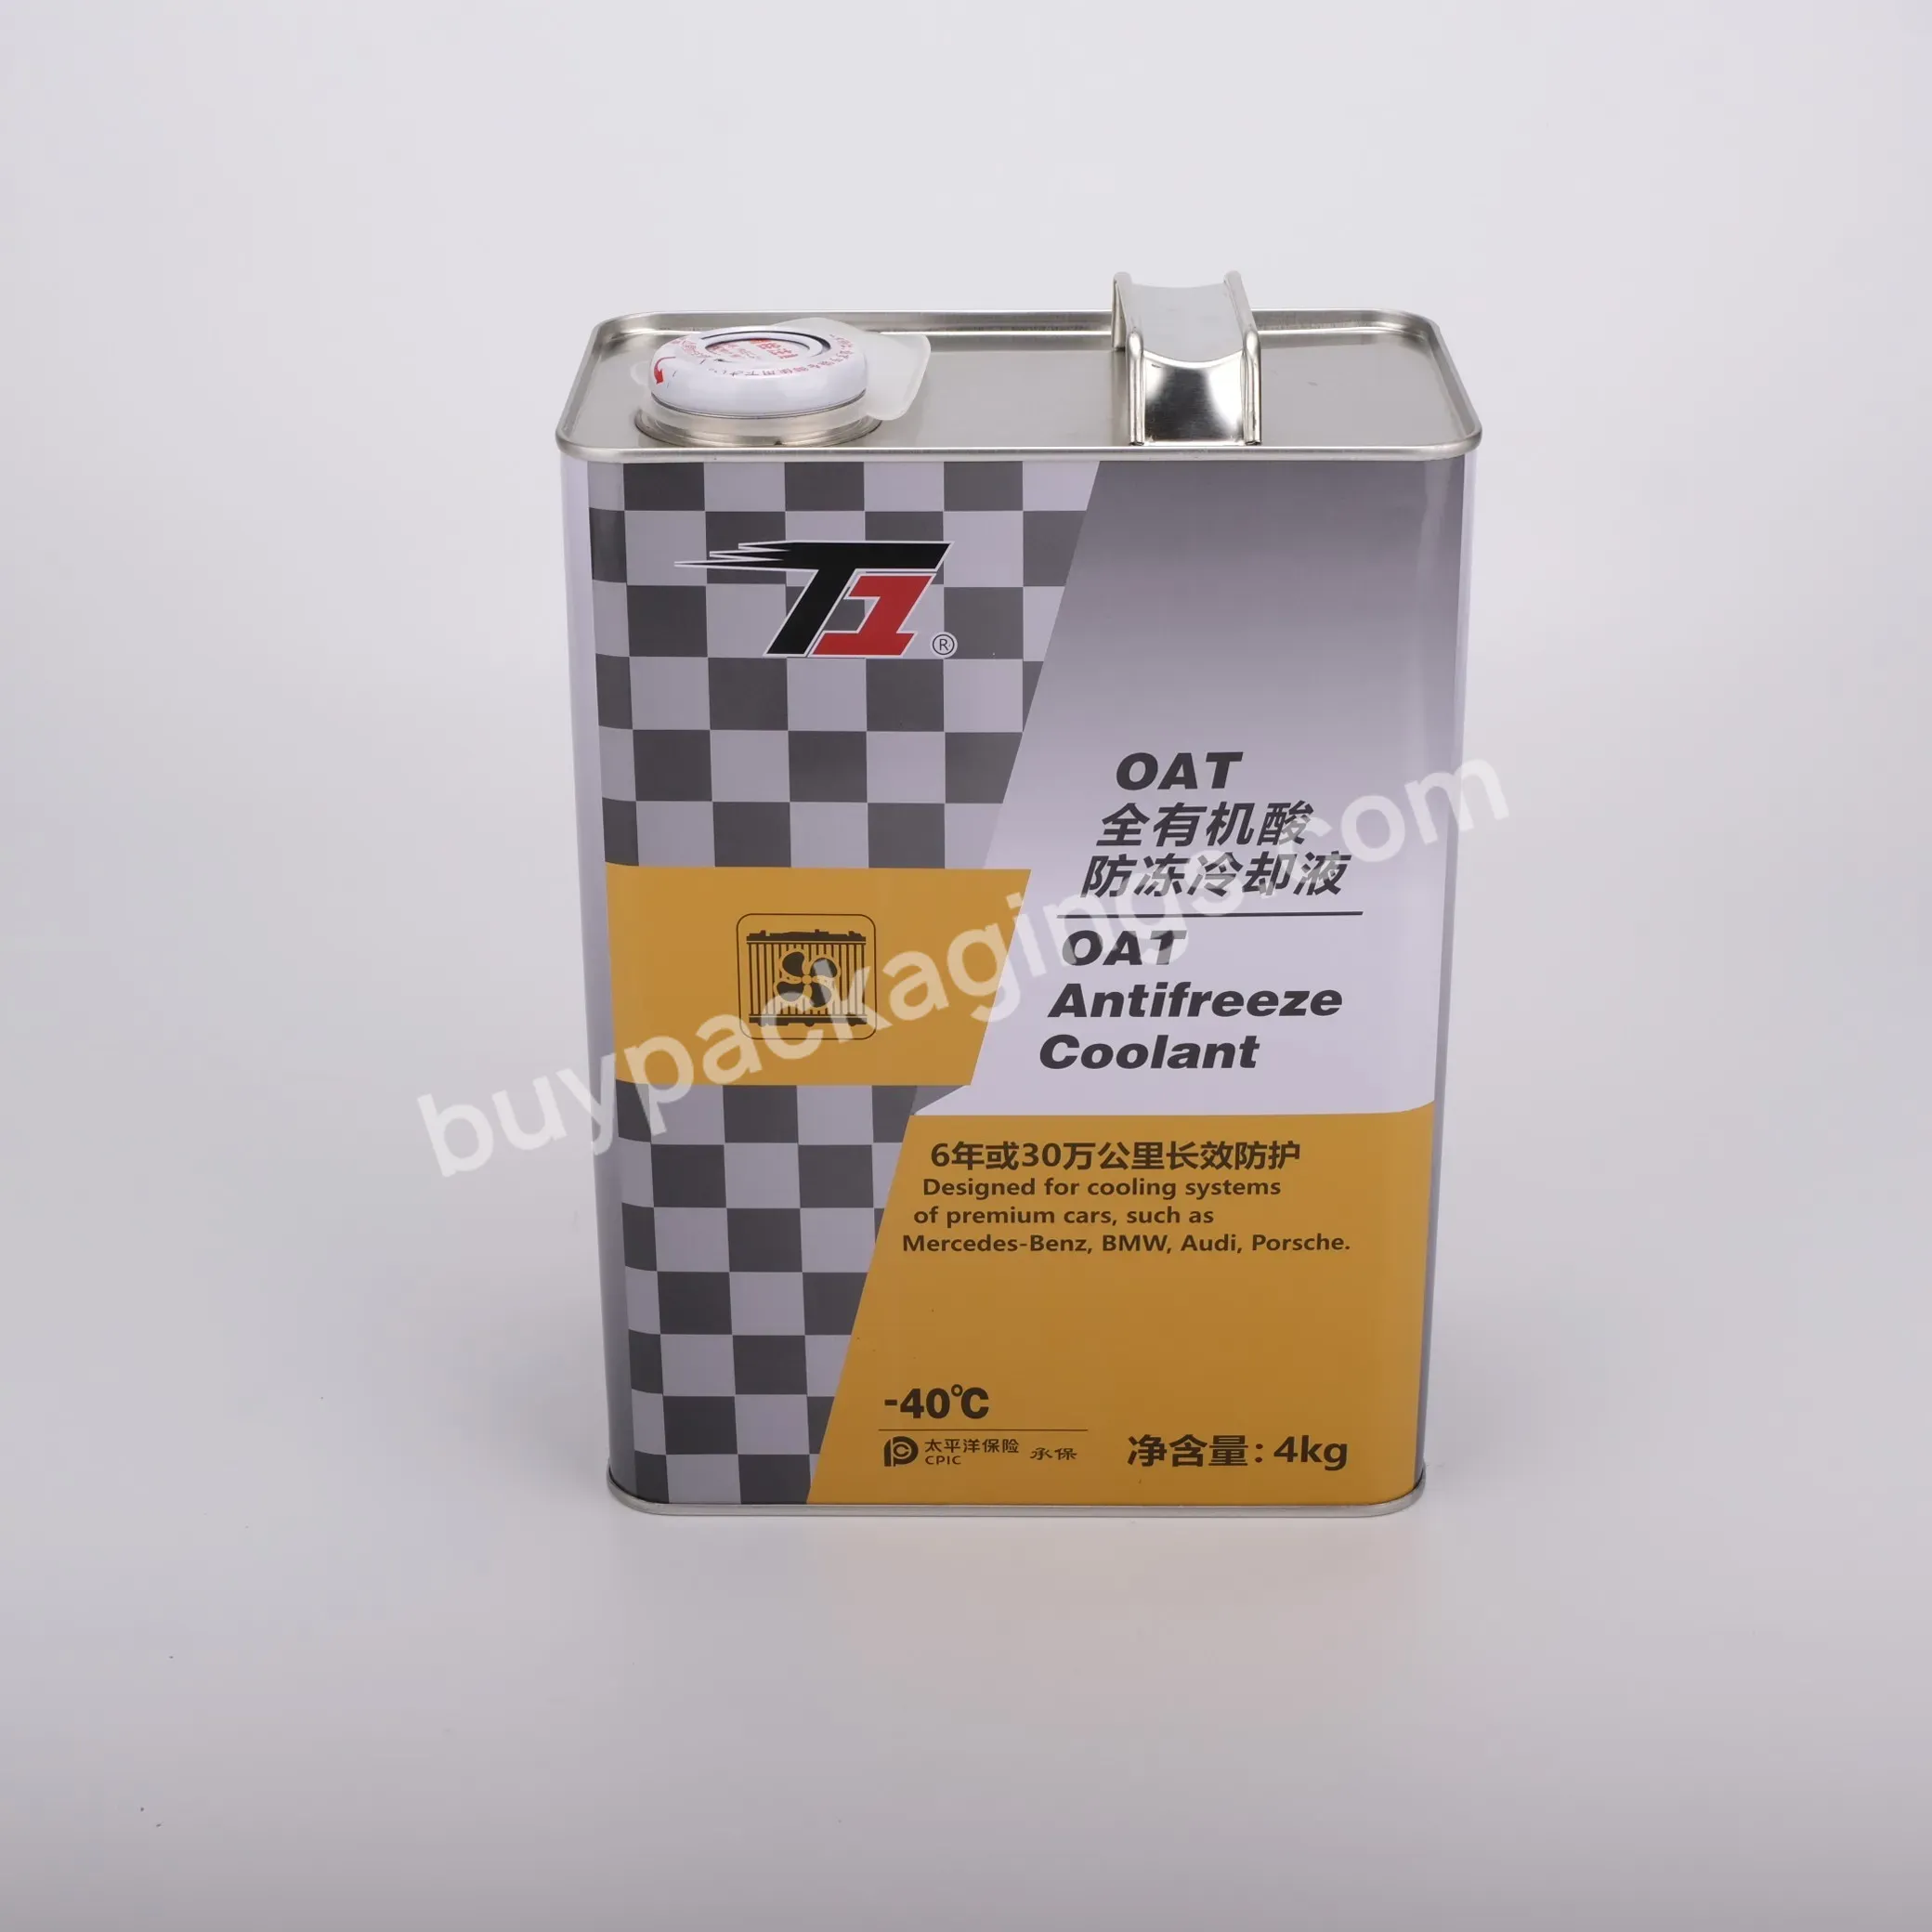 4 Litres Square Printed F-style Engine Oil Brake Oil Motor Oil Tin Can With Spout - Buy 4 Litres Square Oil Tin Can,4 Litres Square Glue Tin Can,4 Litres Square Tin Can.